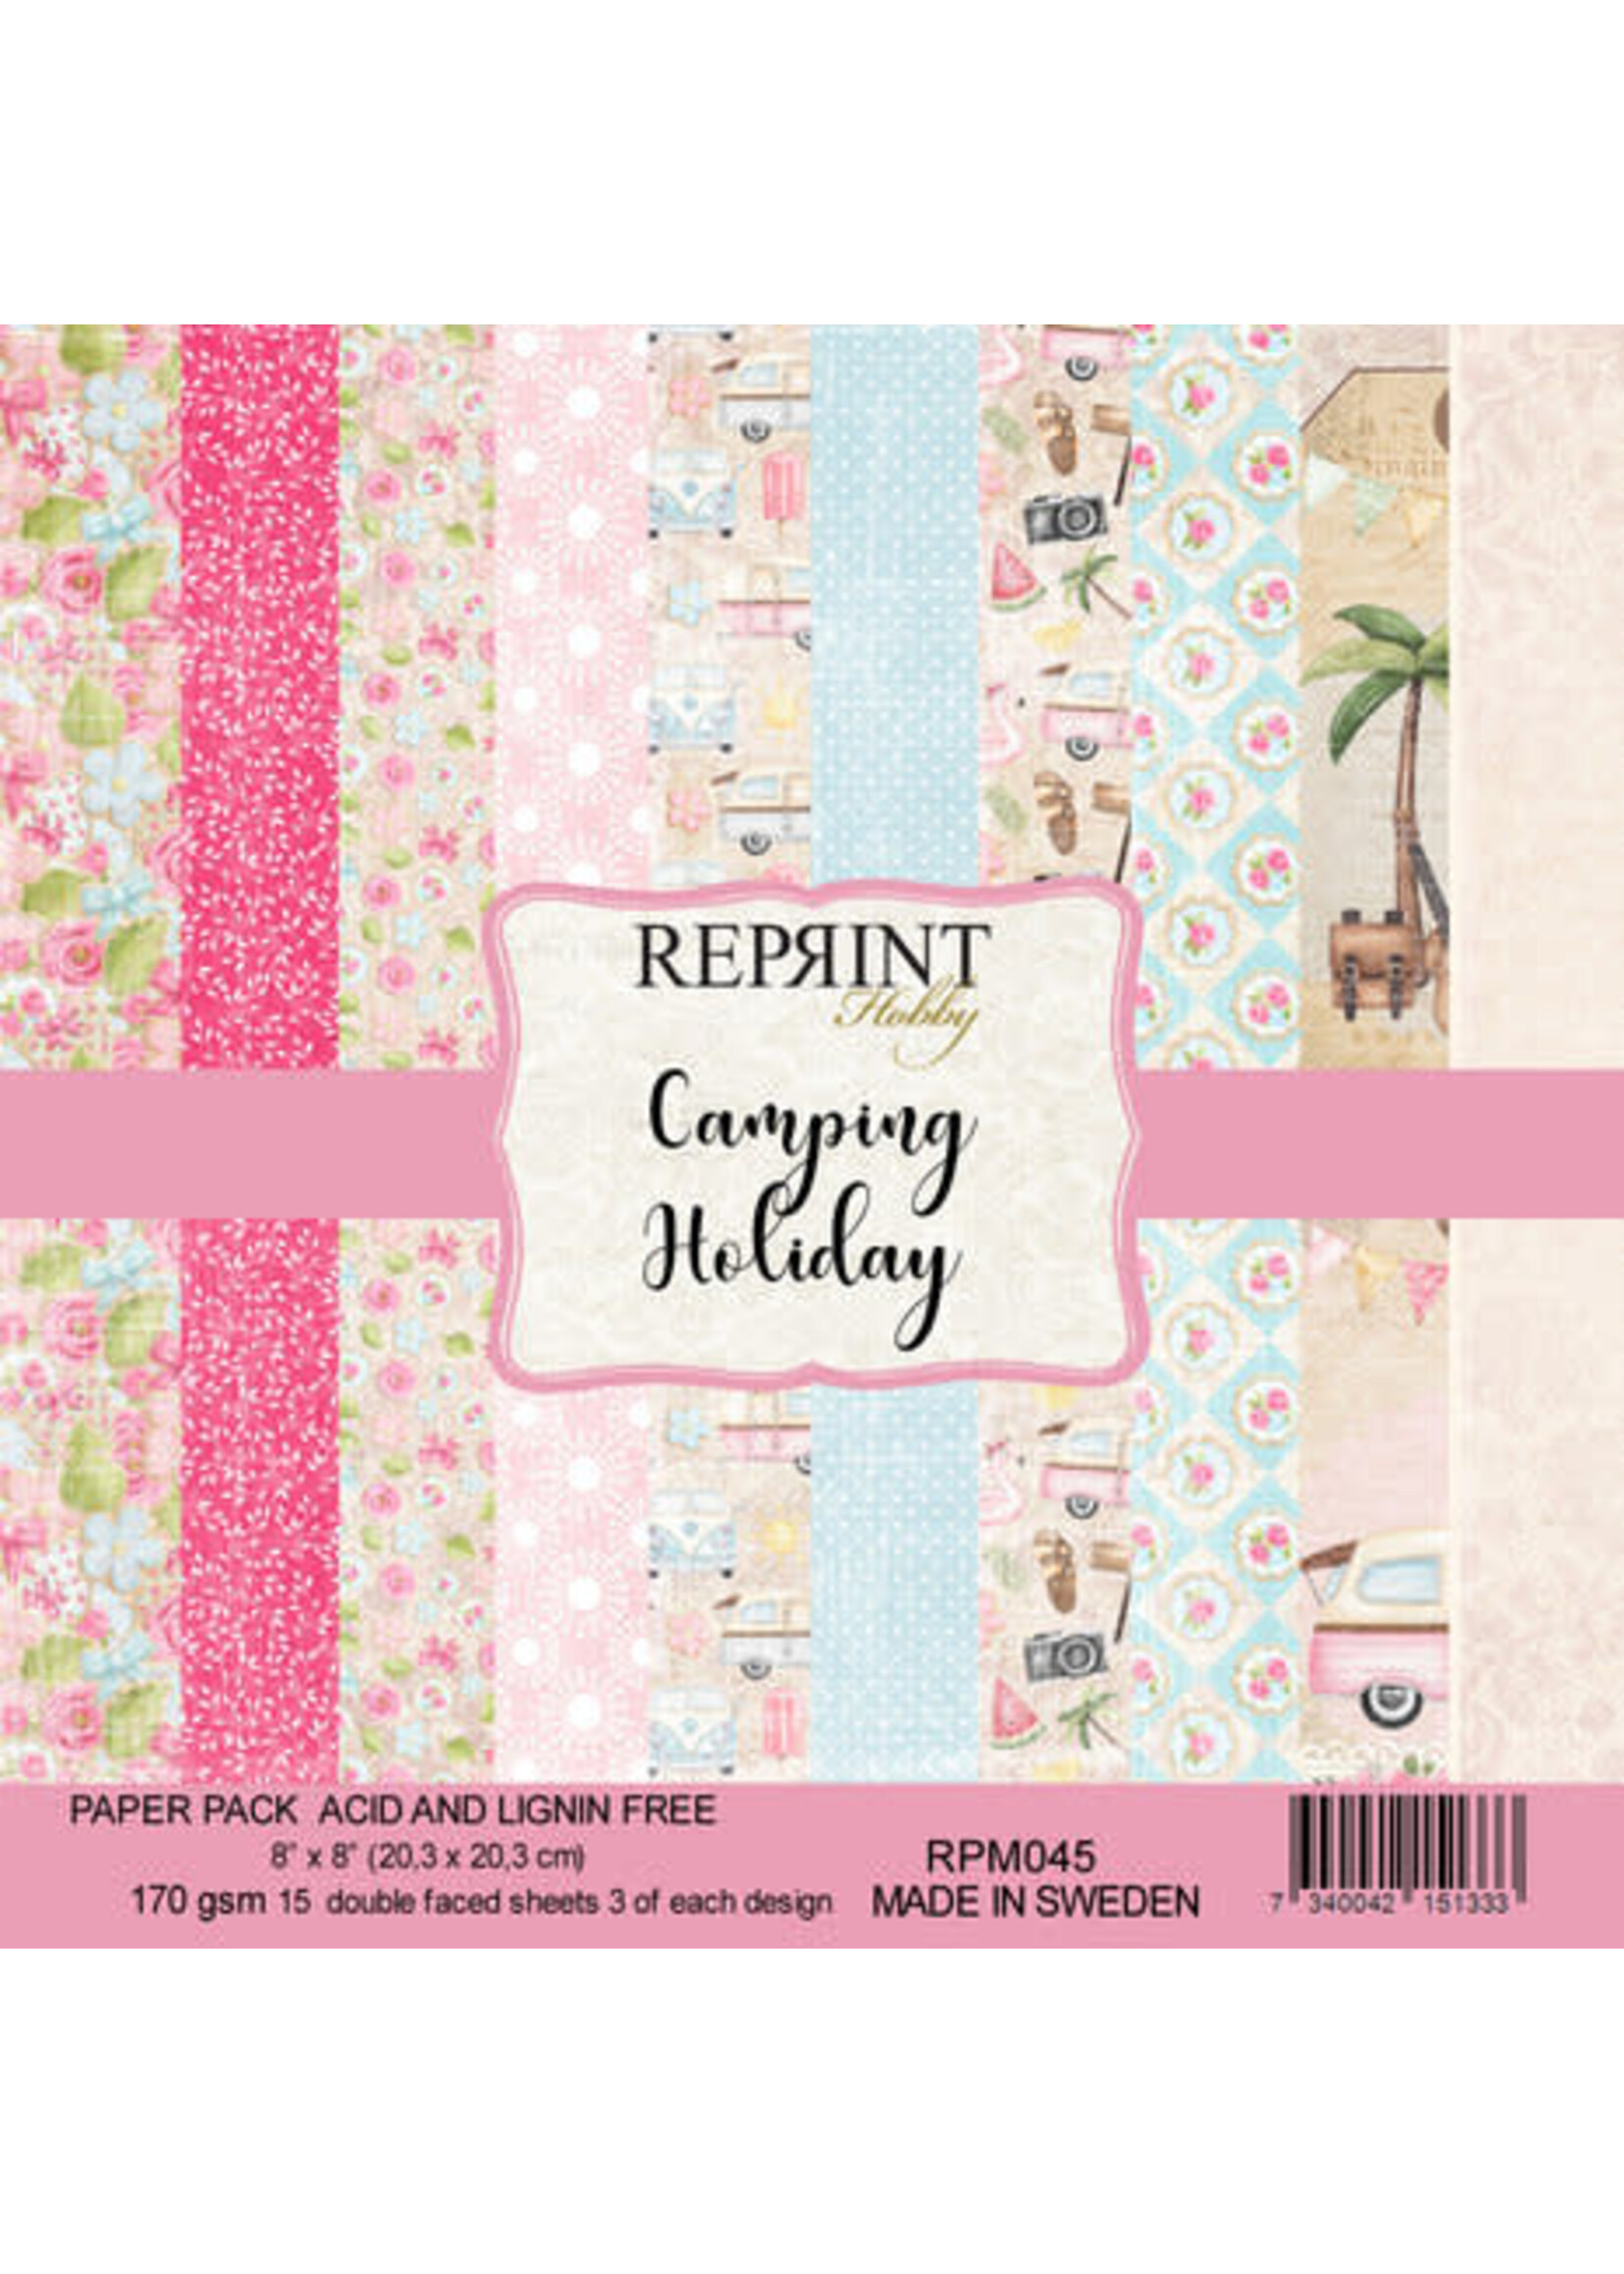 Reprint Camping Holiday 8x8 Inch Paper Pack (RPM045)